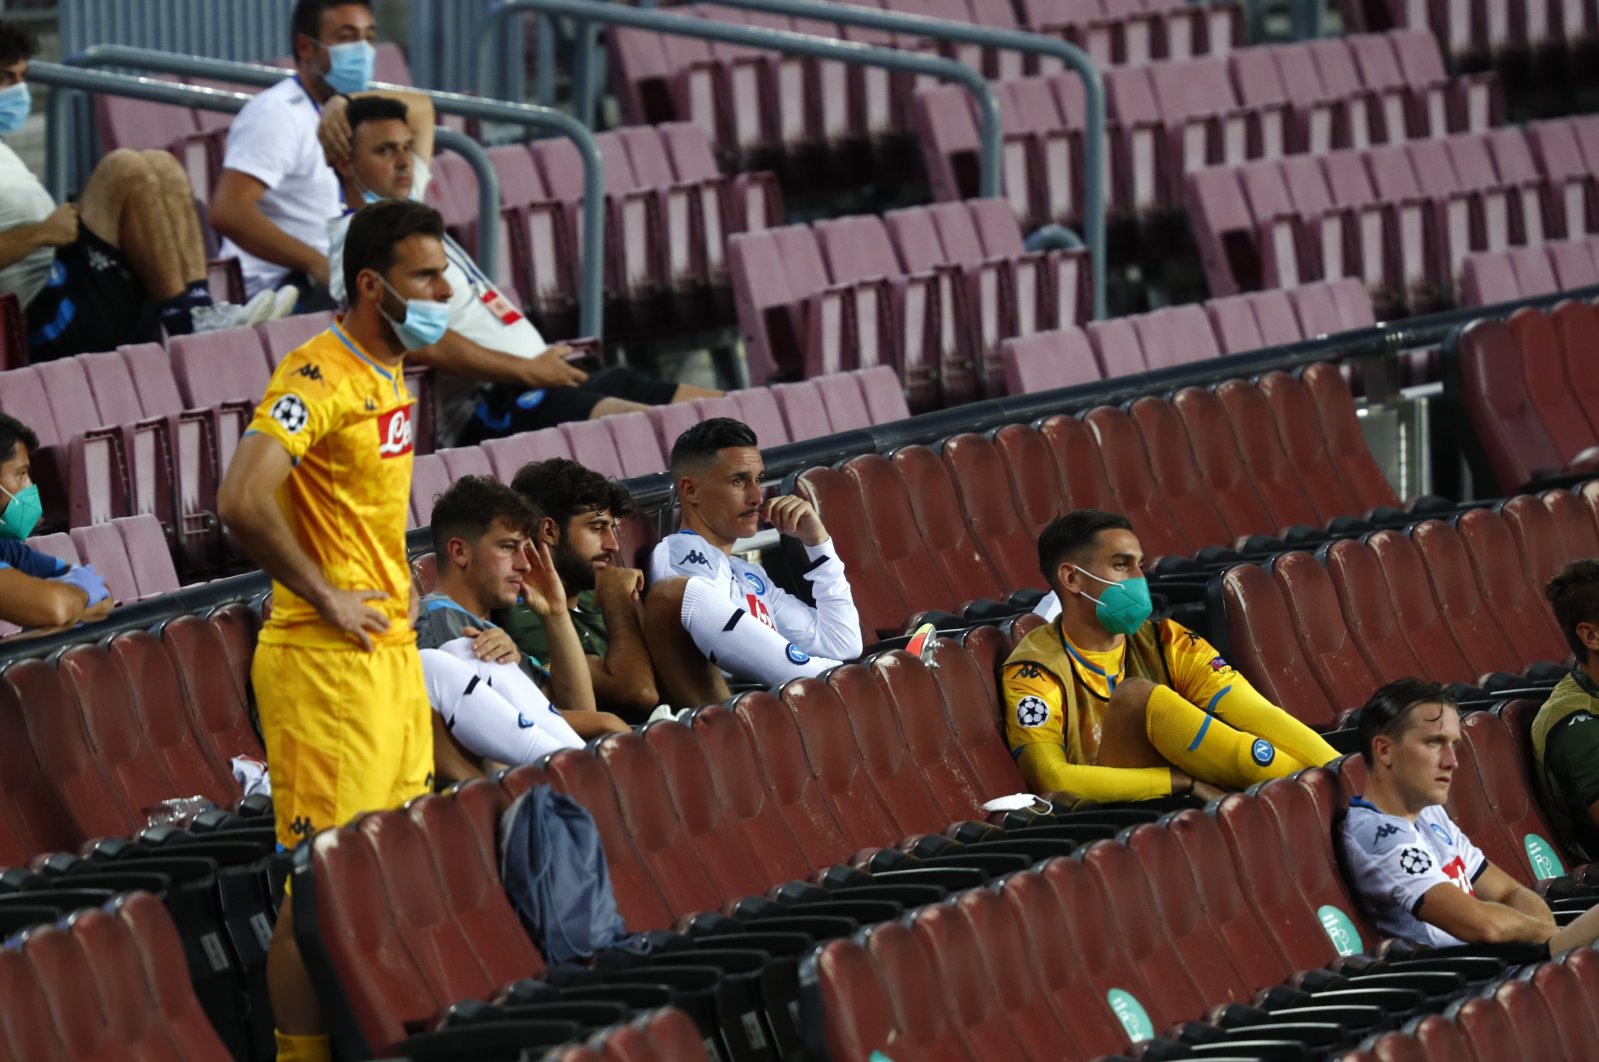 Napoli substitutes sit in the stands during a Champions League match against Barcelona, in Barcelona, Spain, Aug. 8, 2020. (AP Photo)